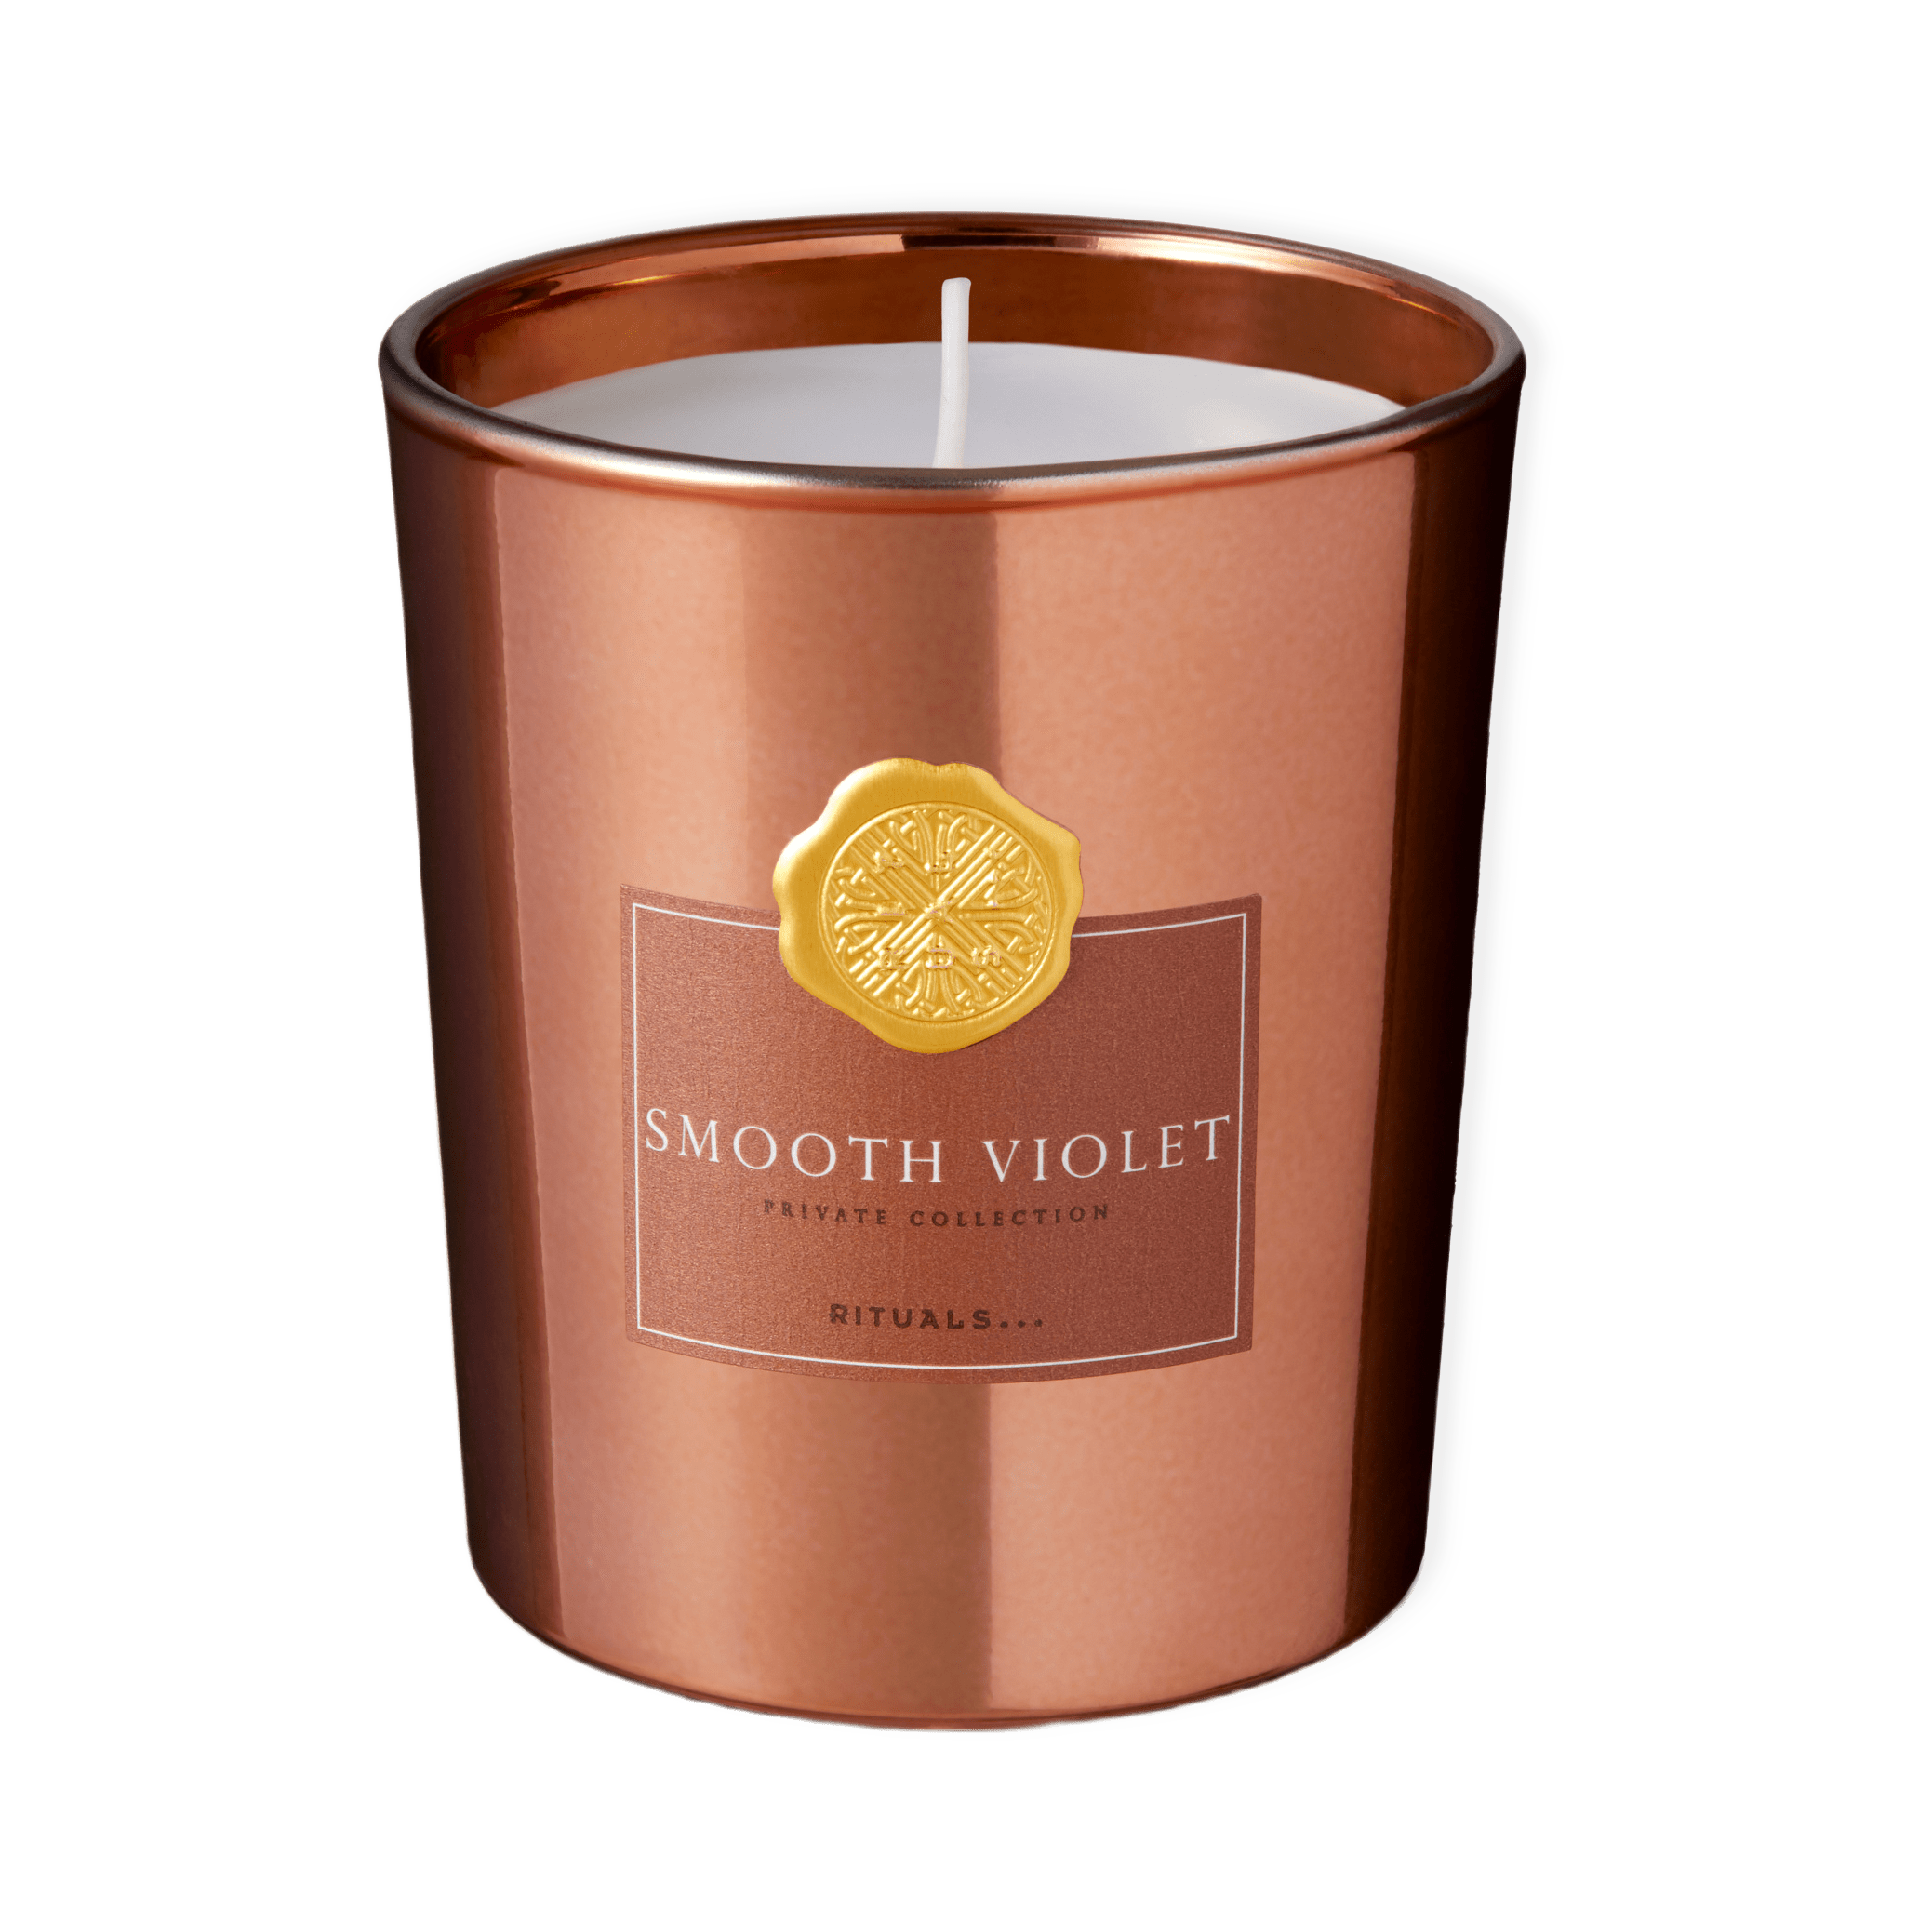 Smooth Violet Scented Candle från Rituals